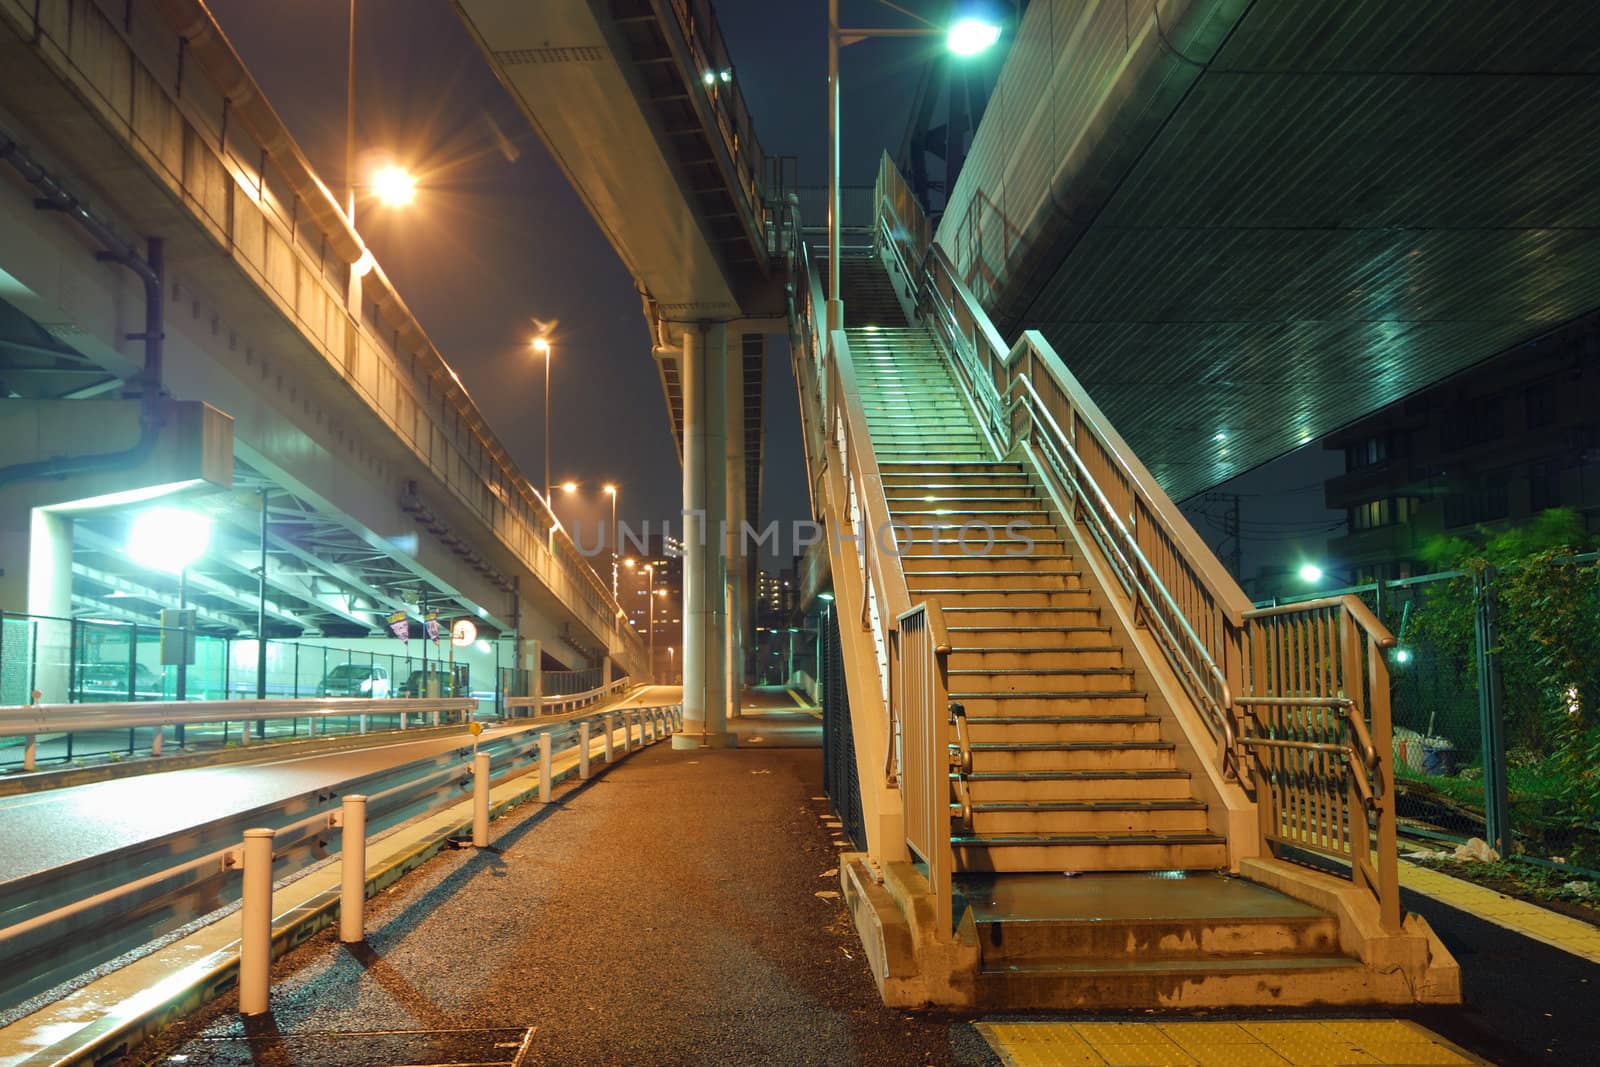 illuminated stairs going up between huge highway structures in night city